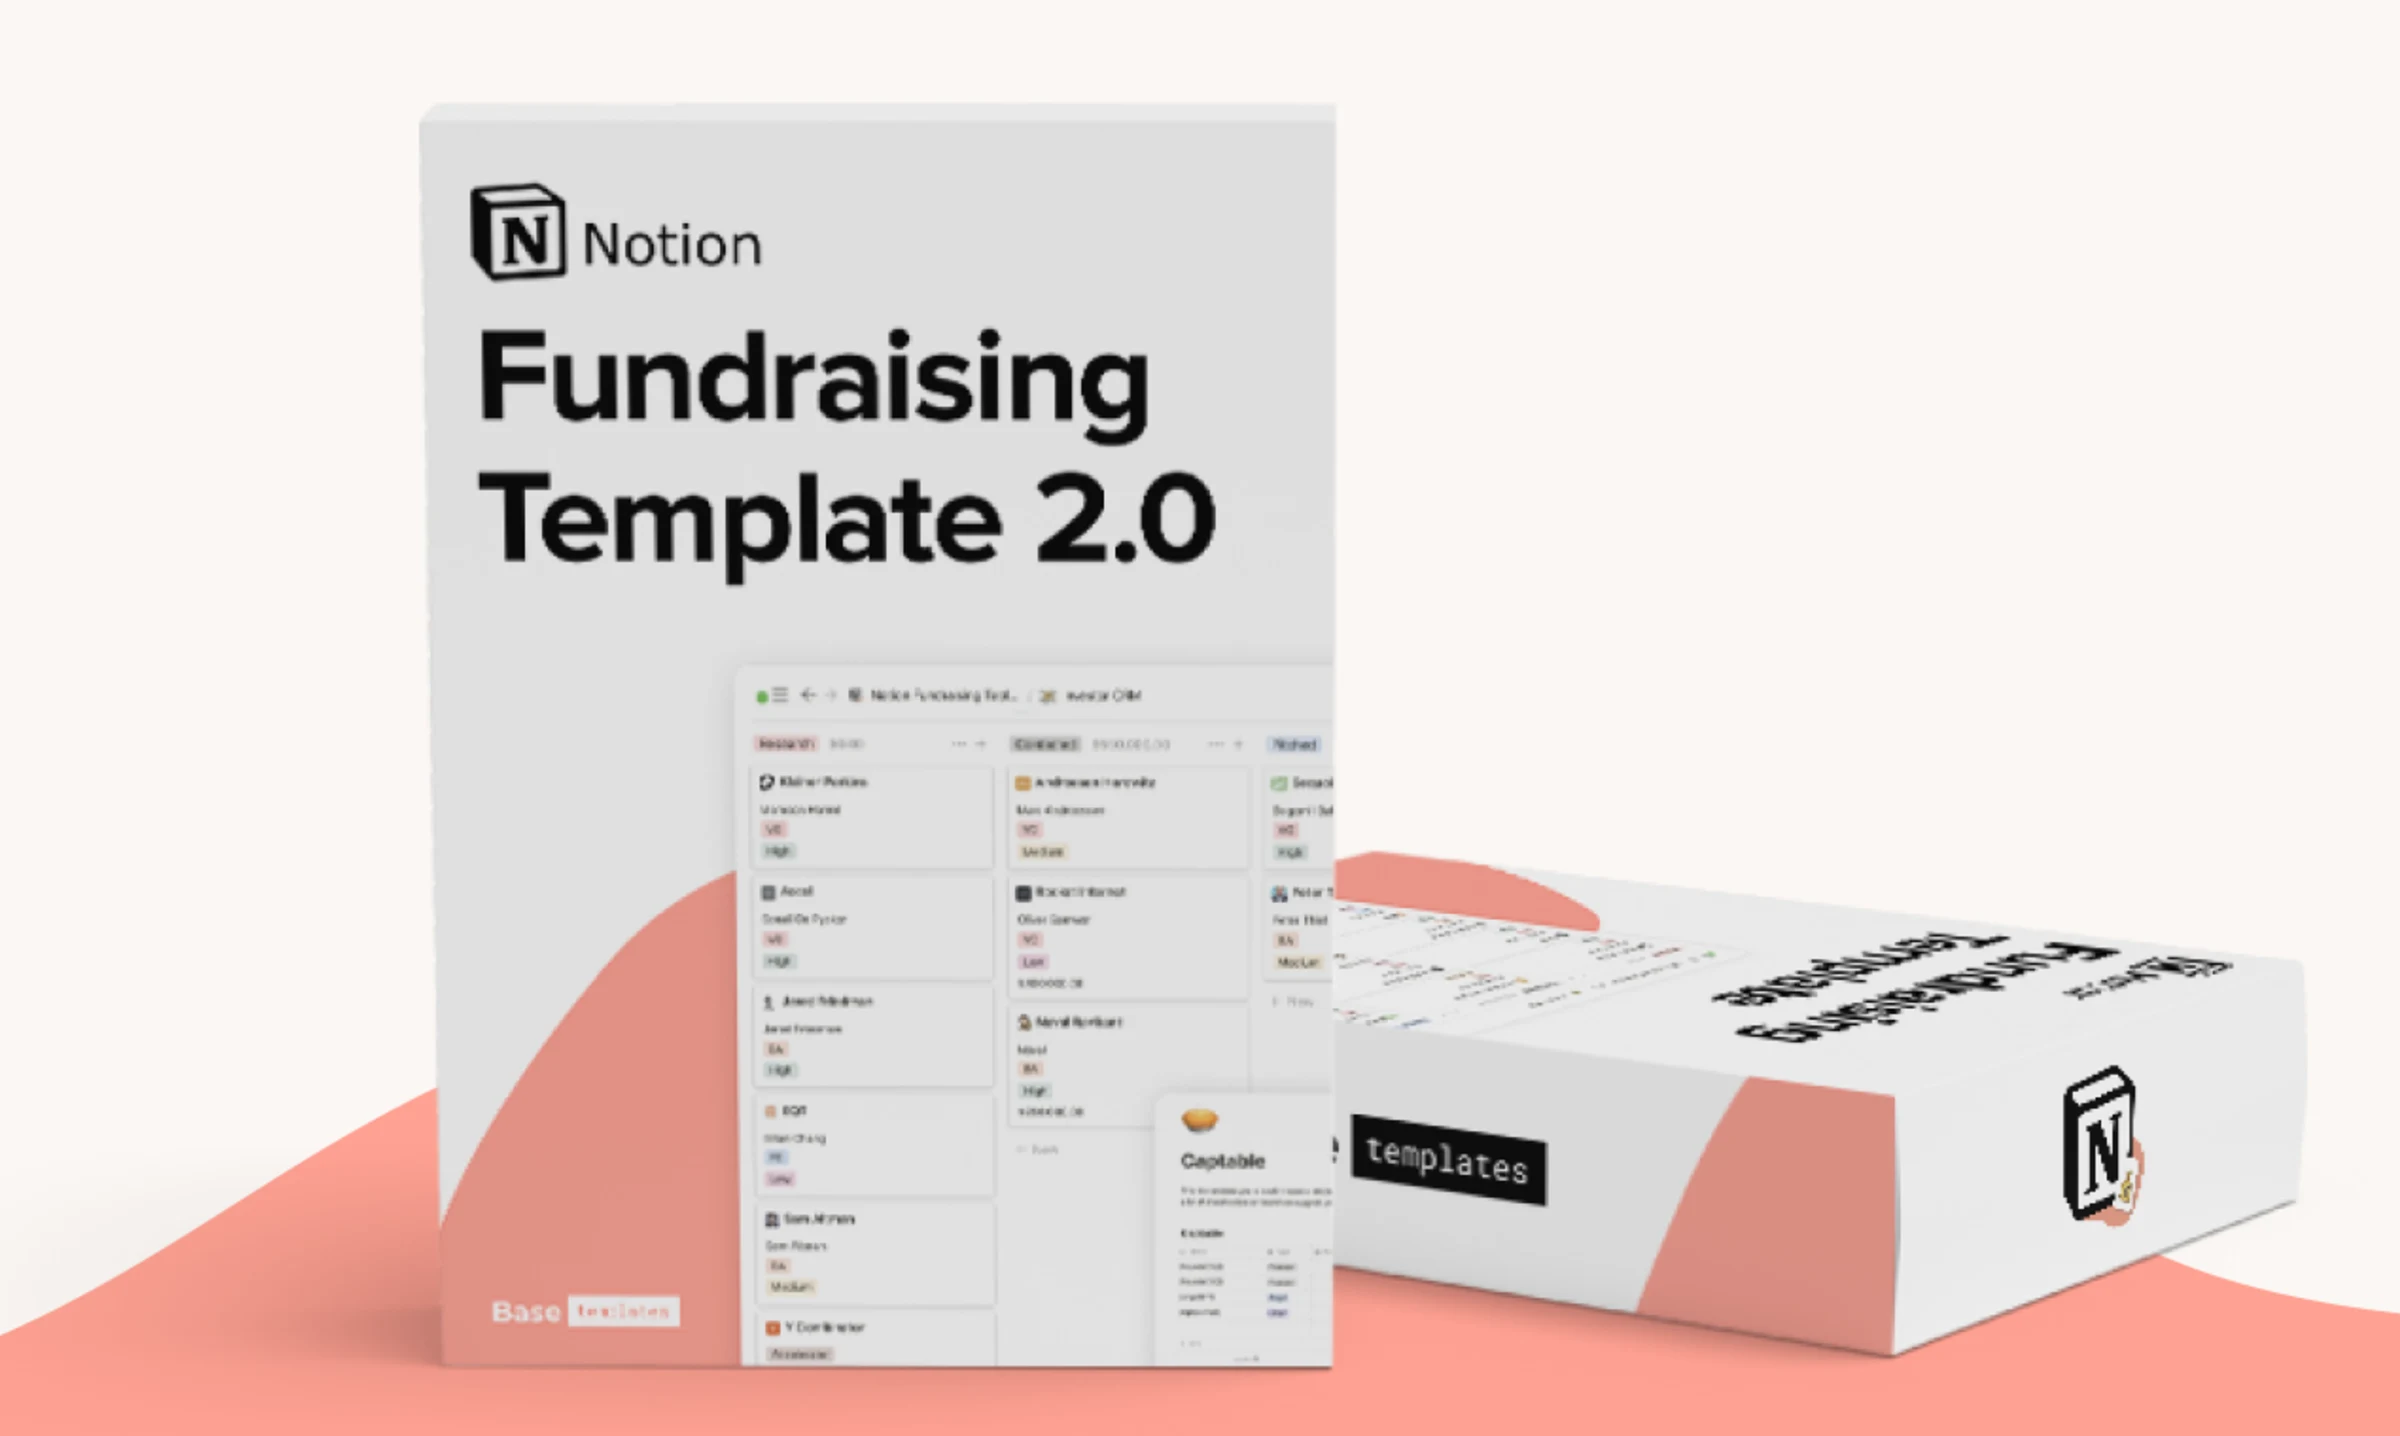 Notion Fundraising Template (Investor CRM)